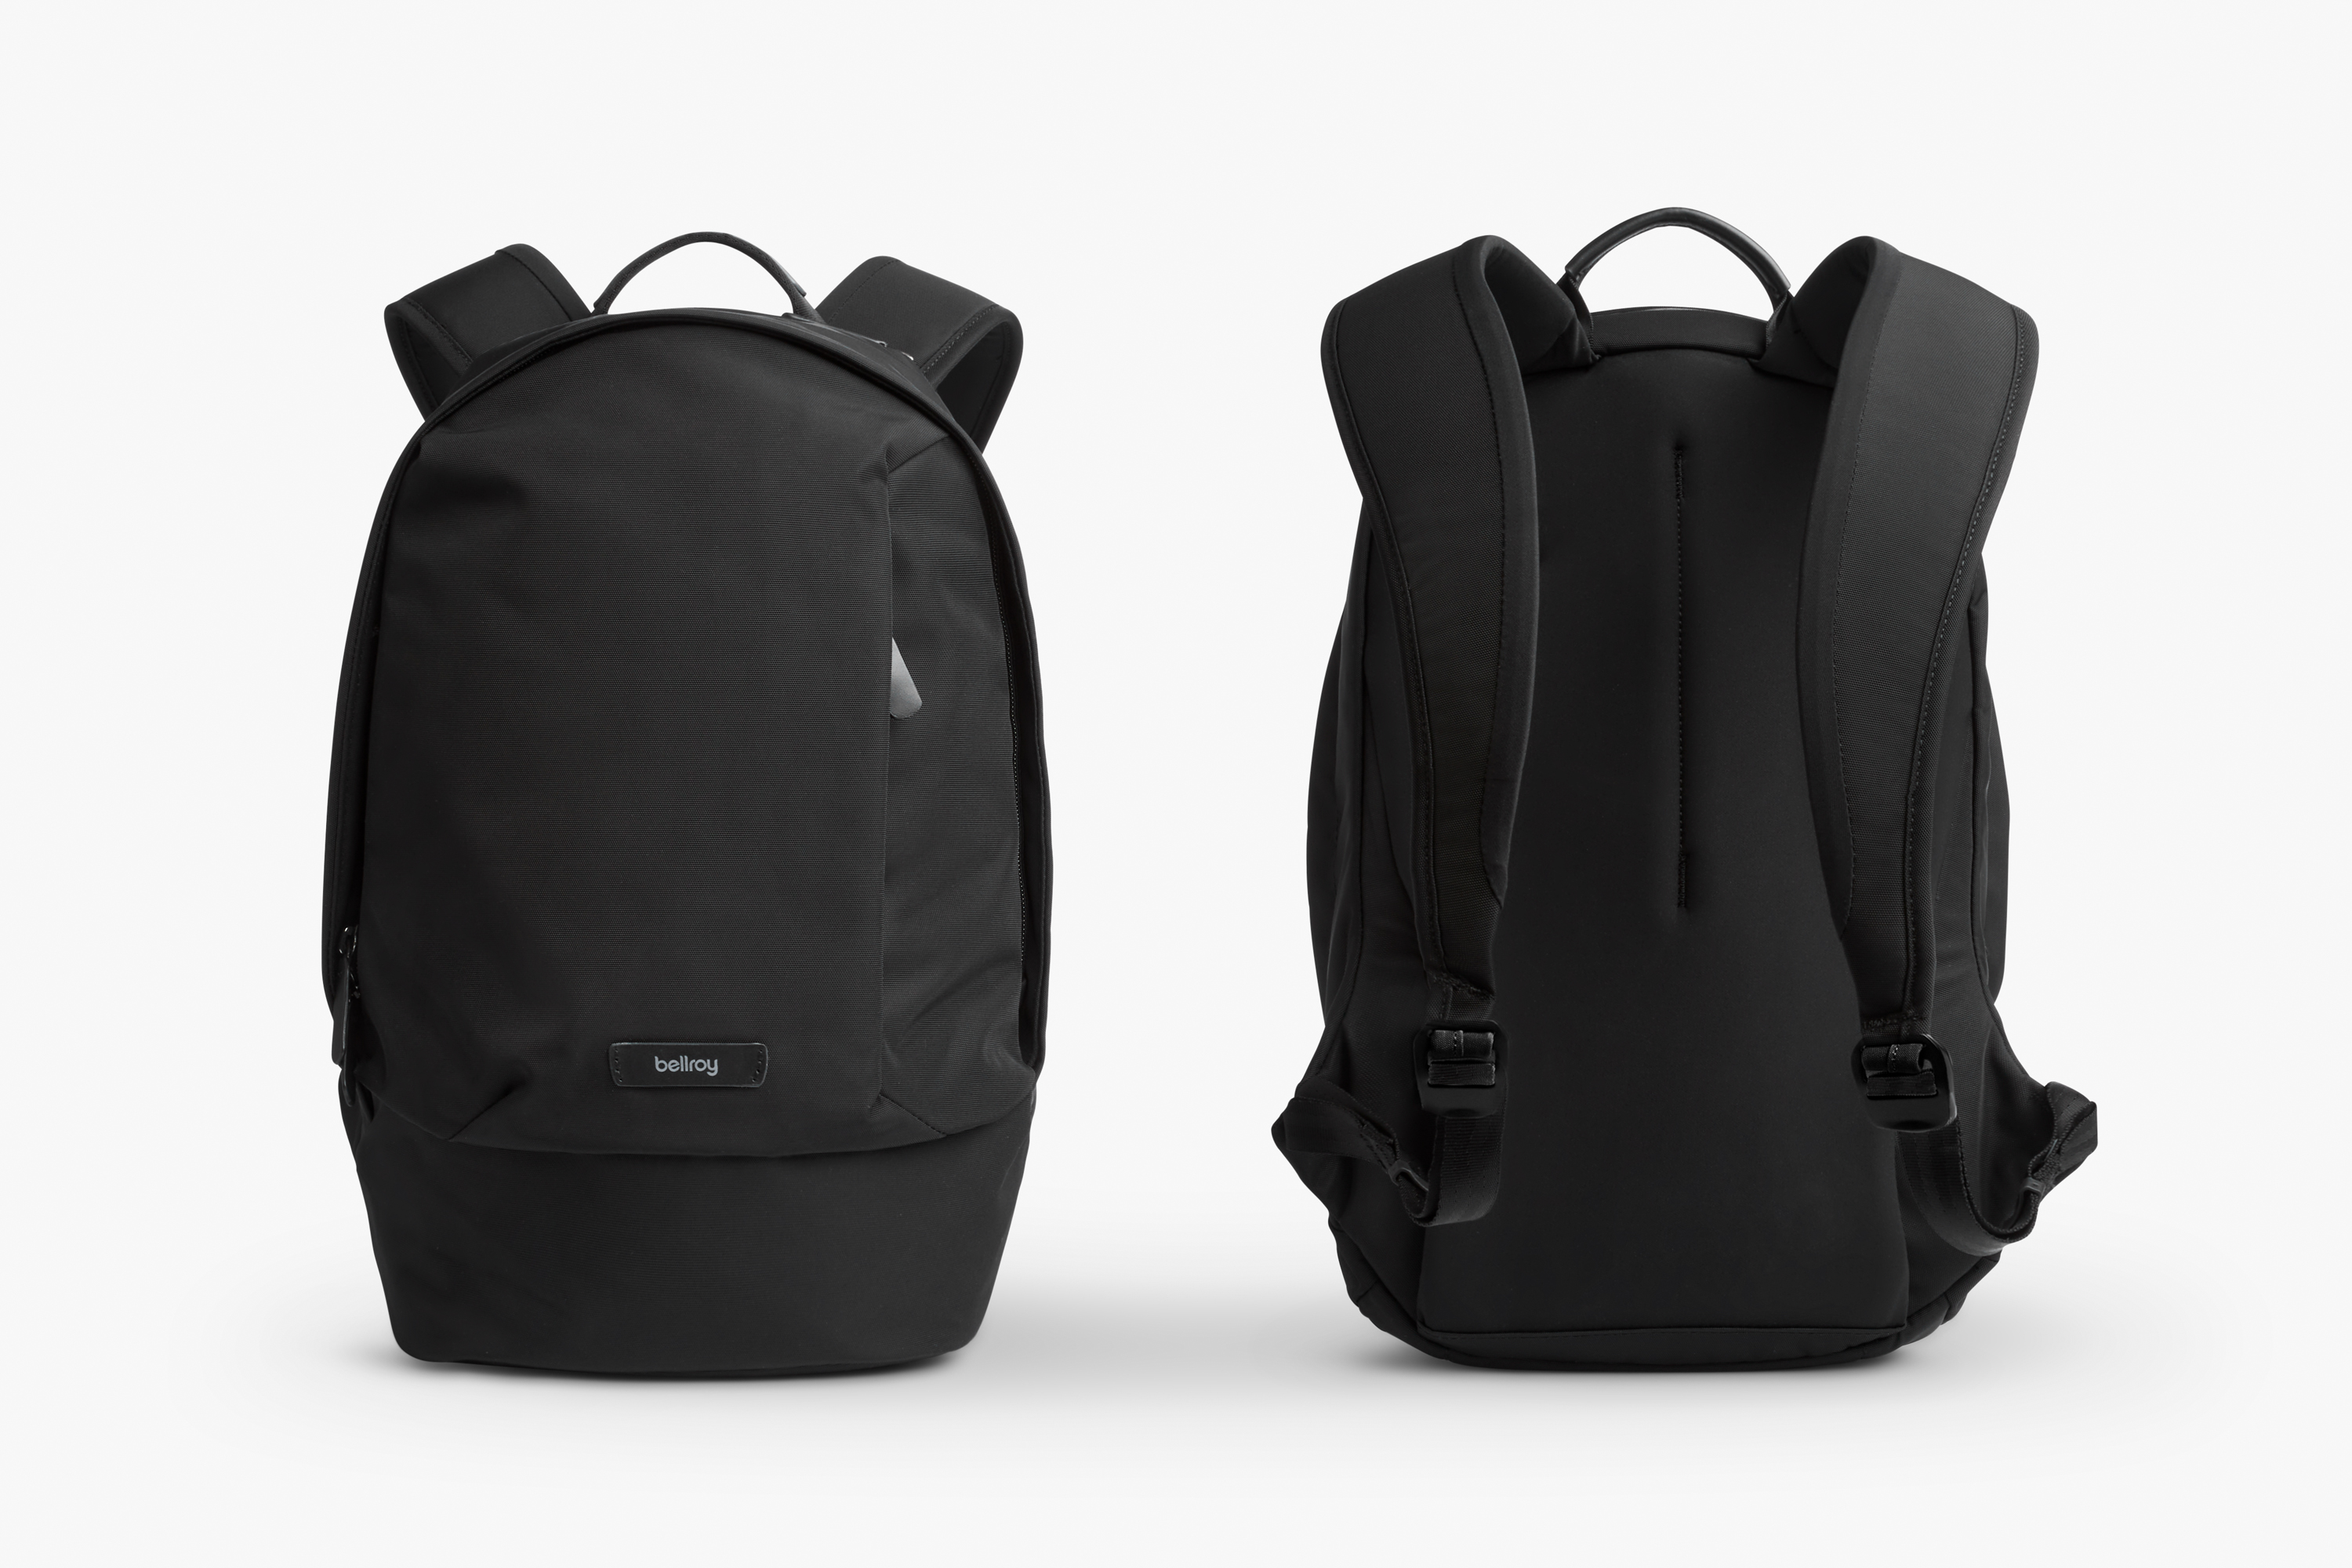 Bellroy Classic Backpack Second Charcoal - Edition 15インチのノートPC 容量20リットル